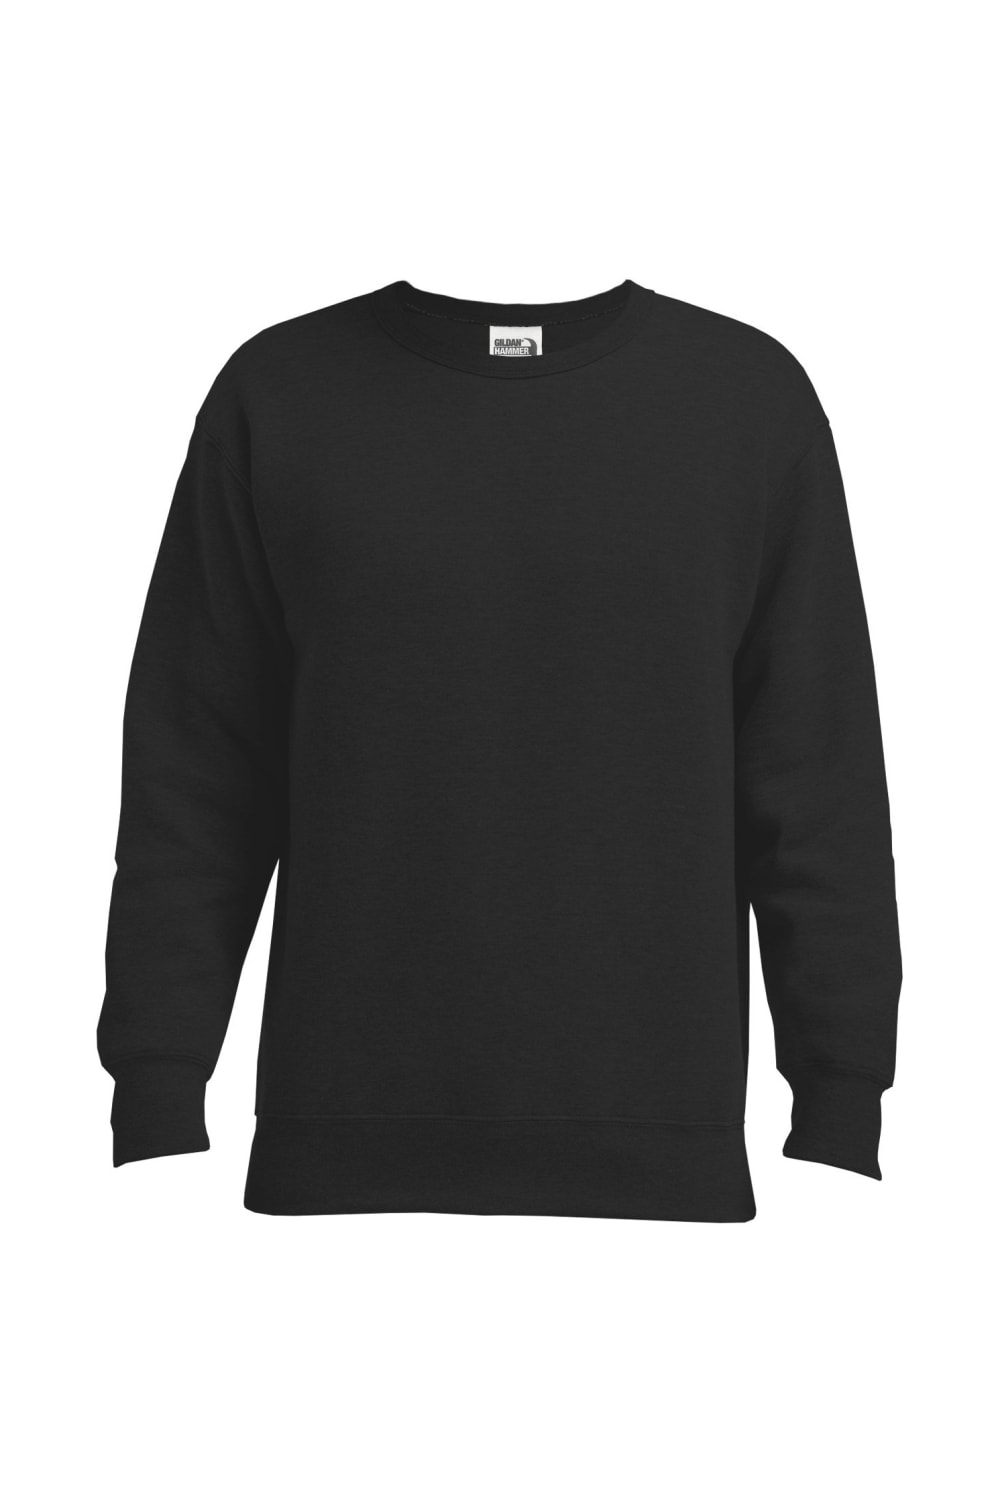 Usopu Mens Basis Solid Color Crew Neck Long Sleeve Sweater 